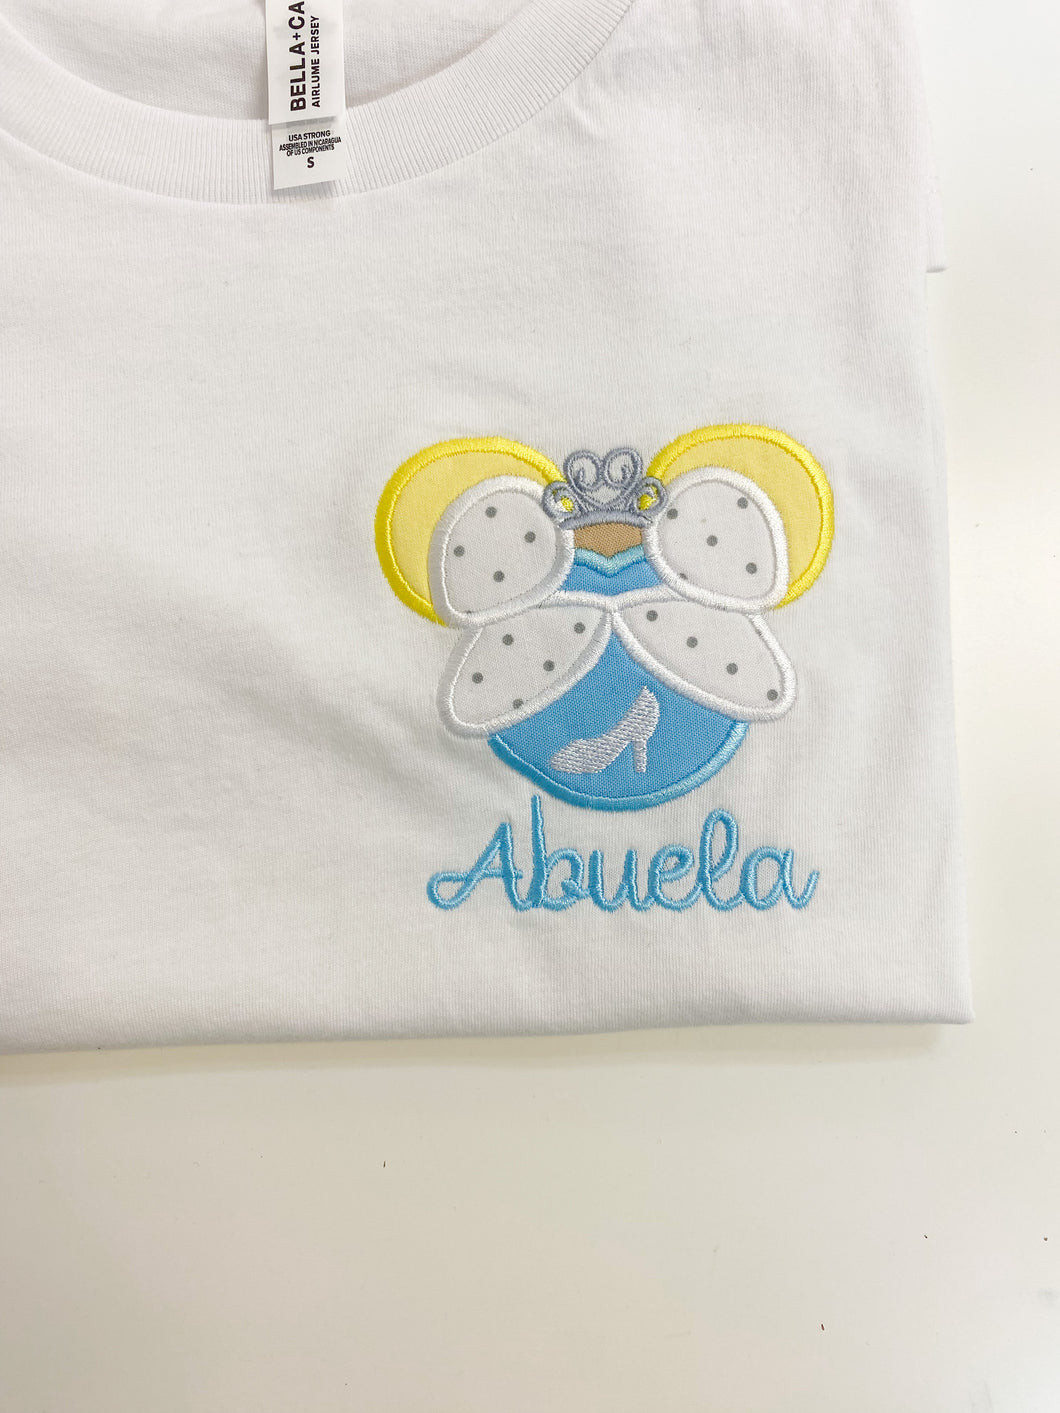 Abuela small slim fit tee - no flaws